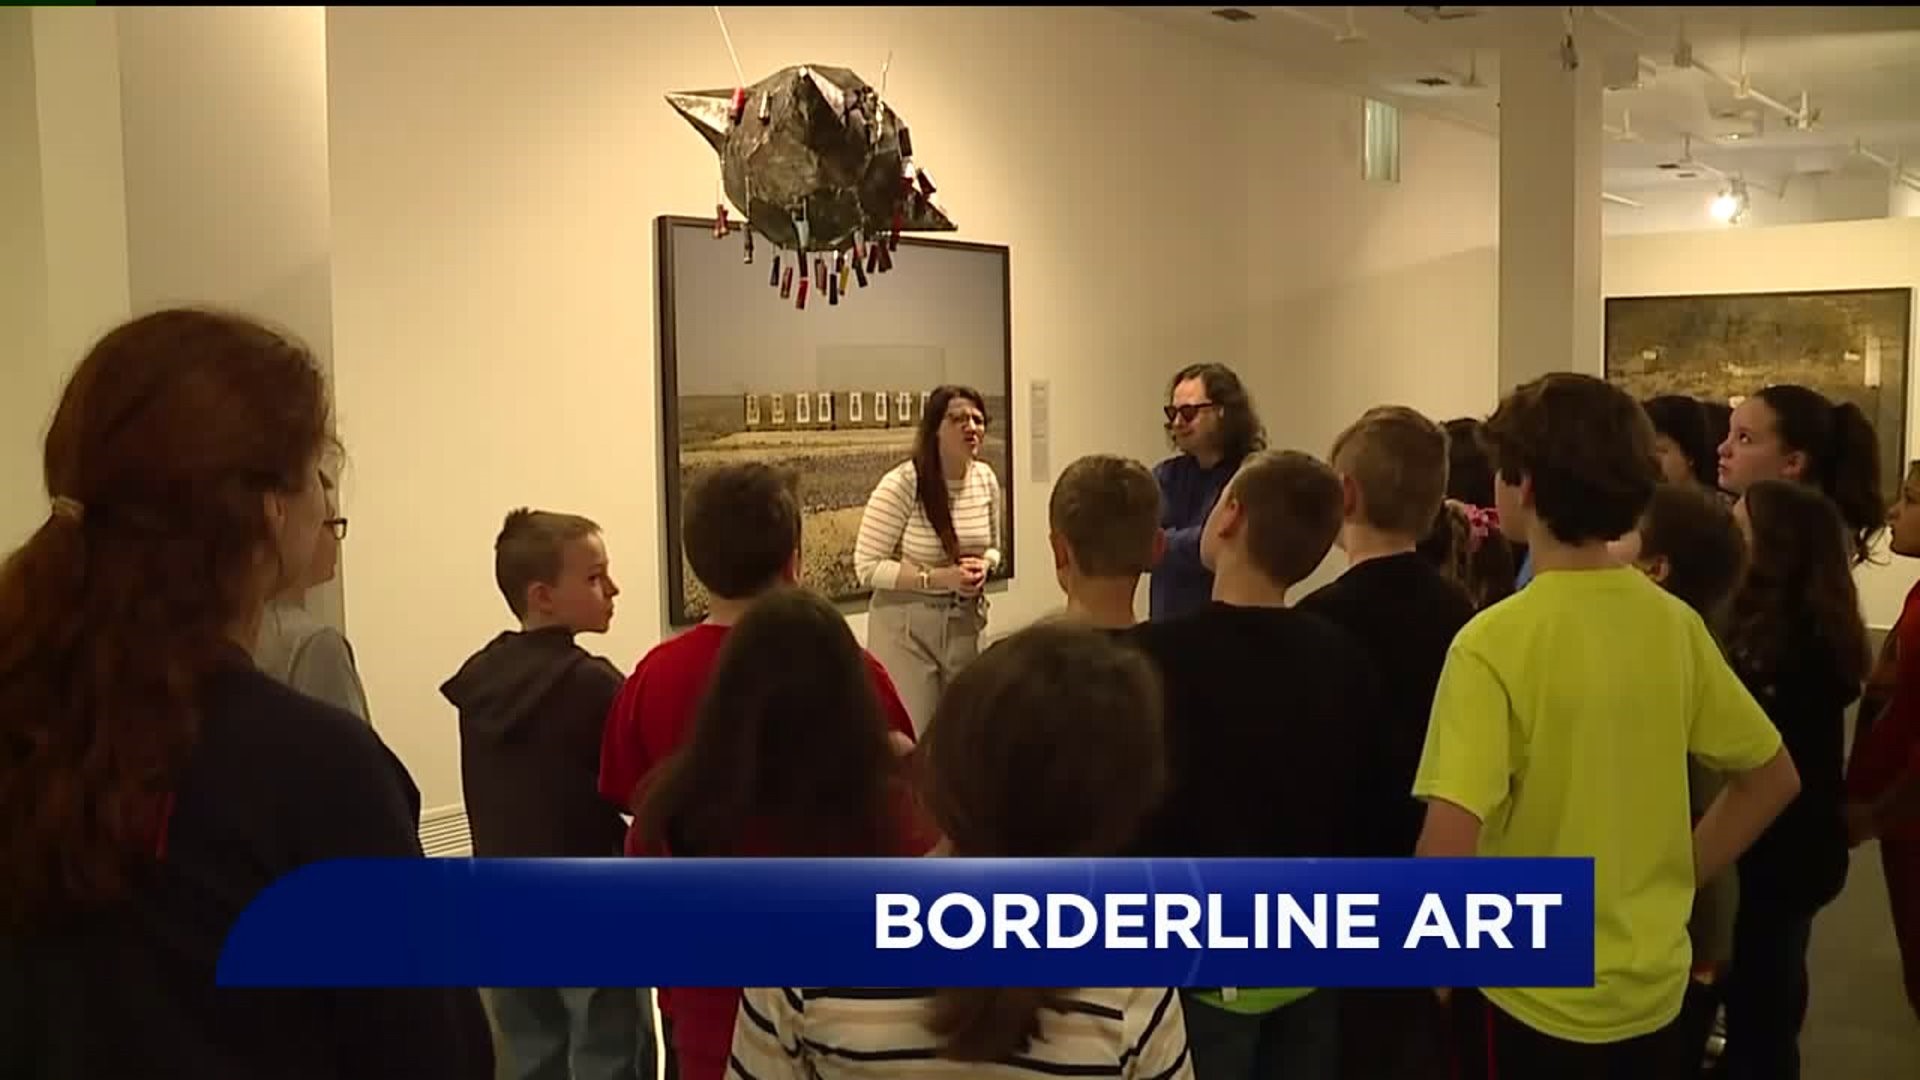 Students Immersed in Borderline Art at Bucknell